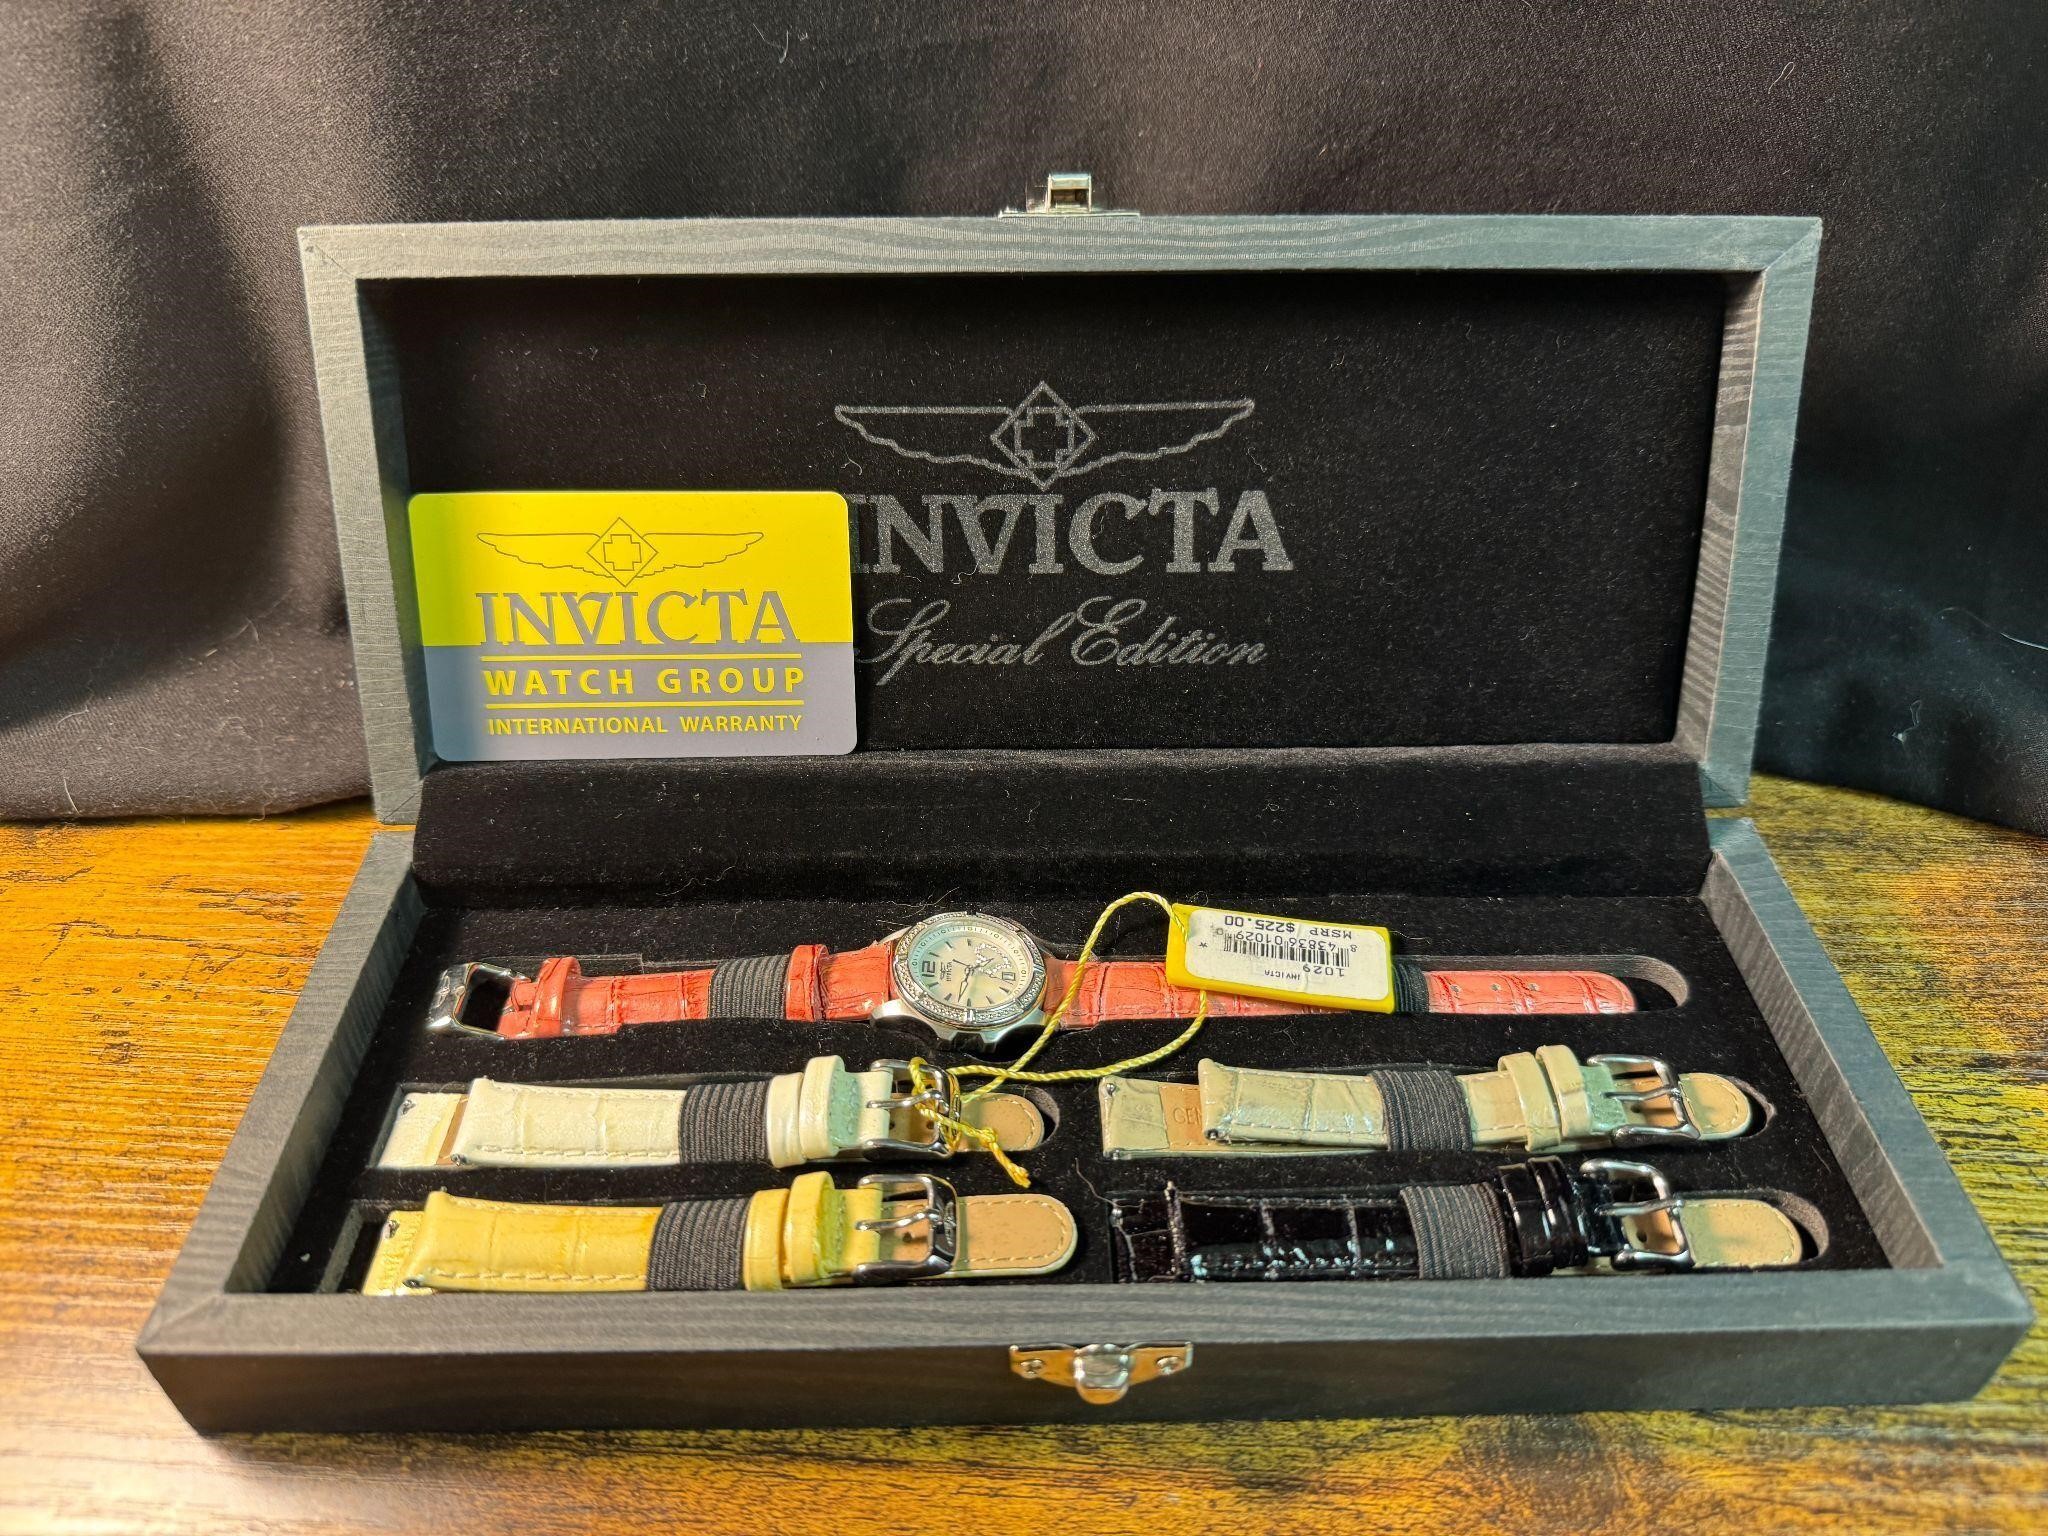 NEW INVICTA WOMANS WATCH GROUP